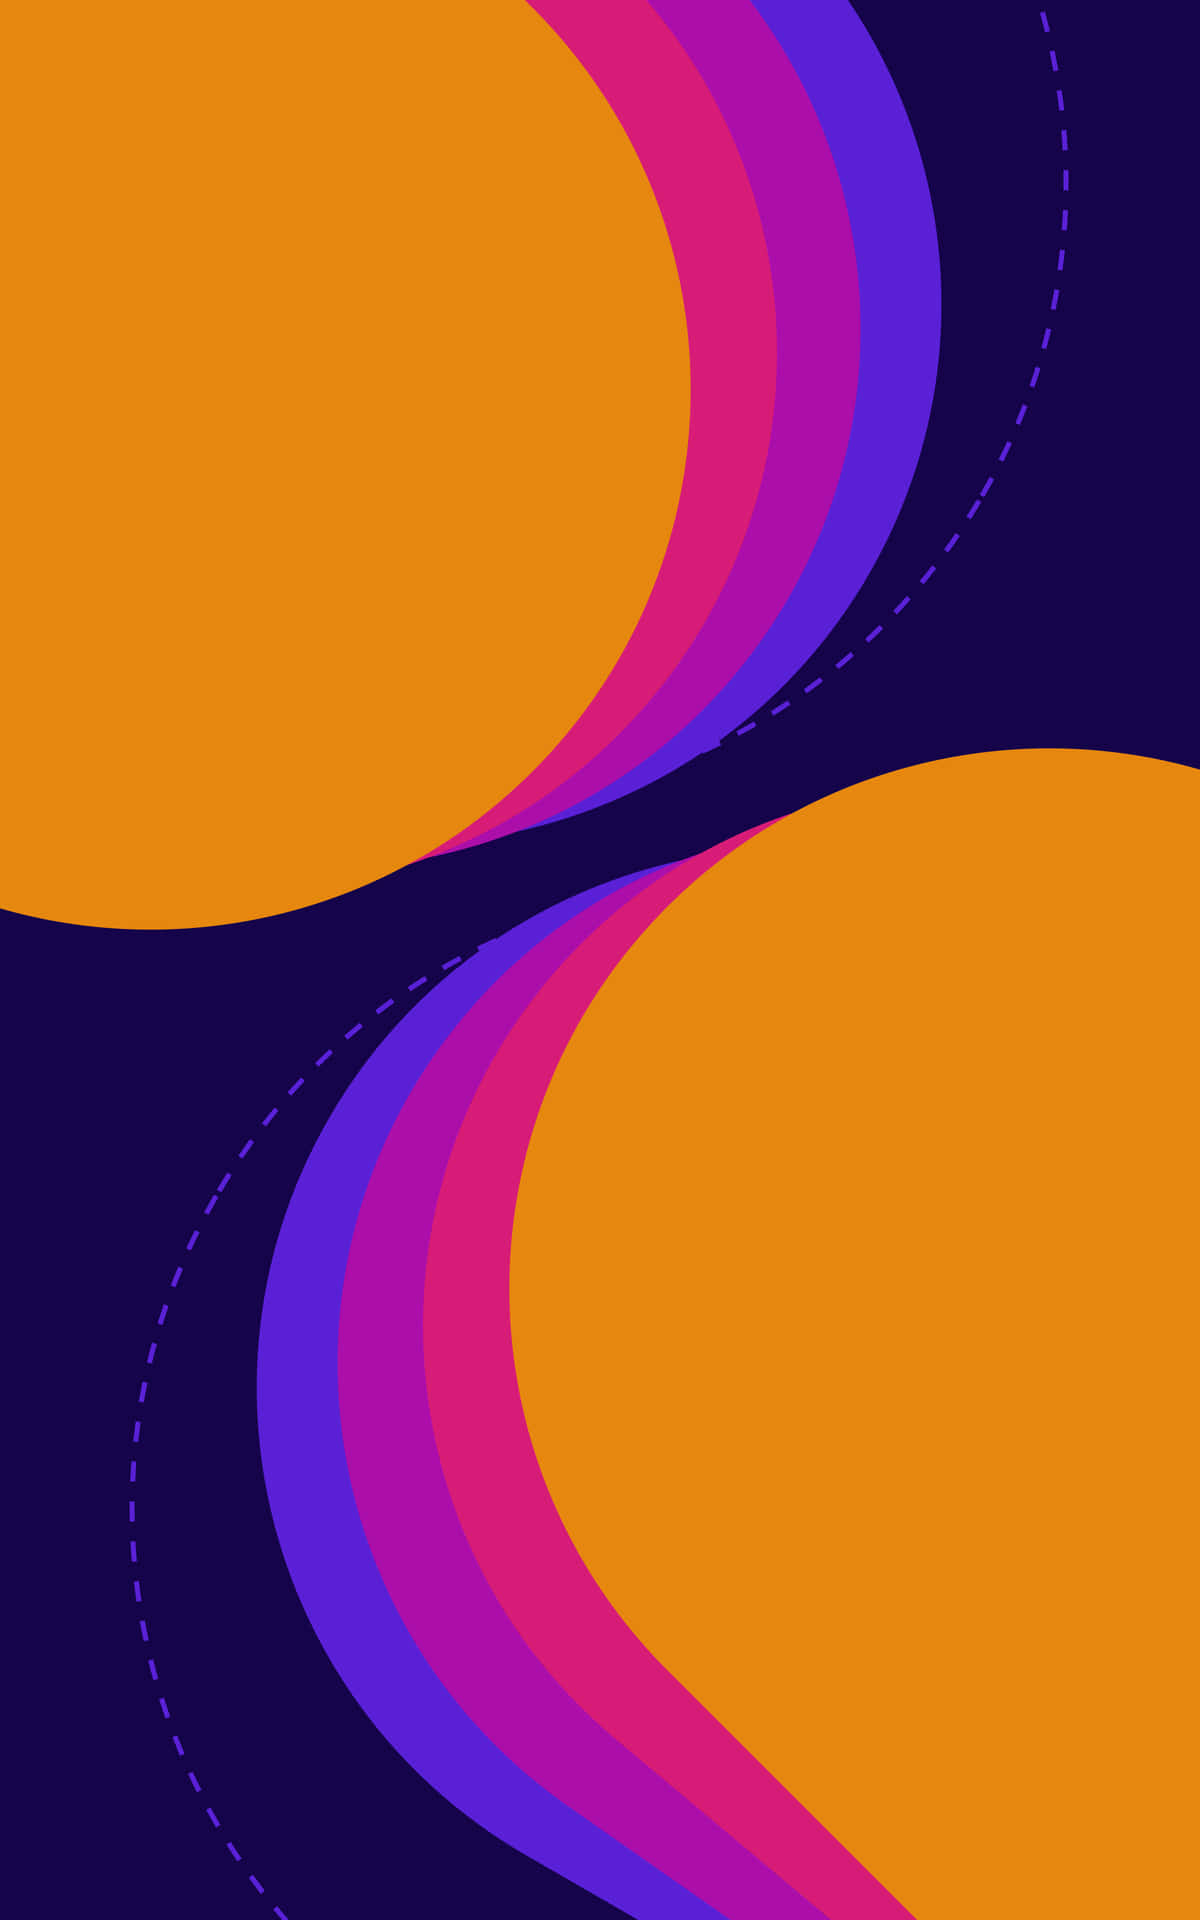 An Orange And Purple Background With Waves